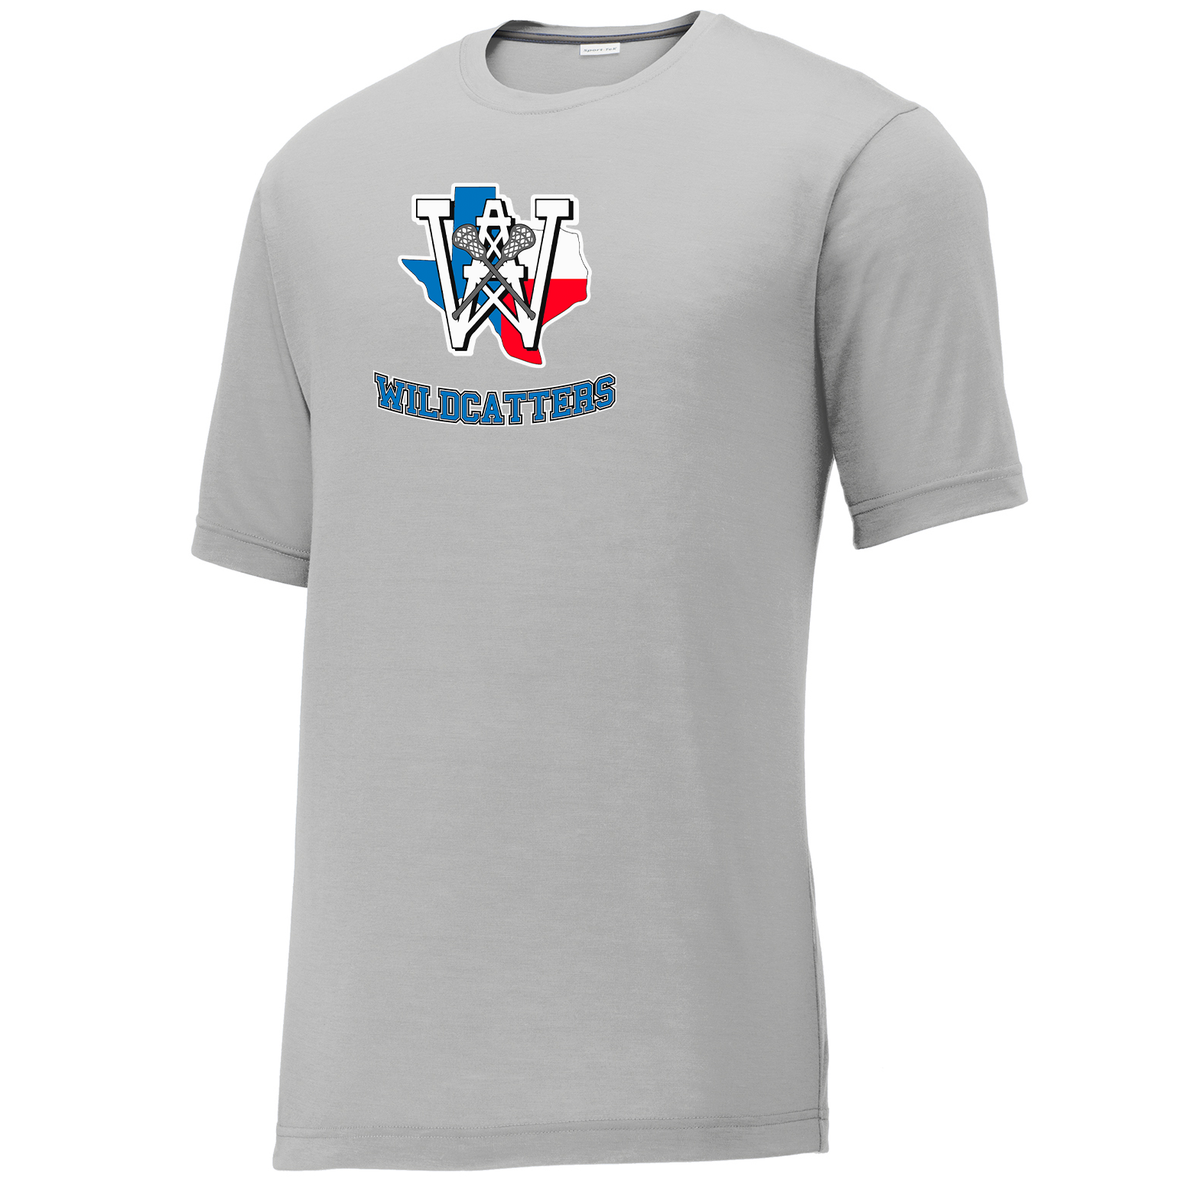 Wildcatters Lax CottonTouch Performance T-Shirt